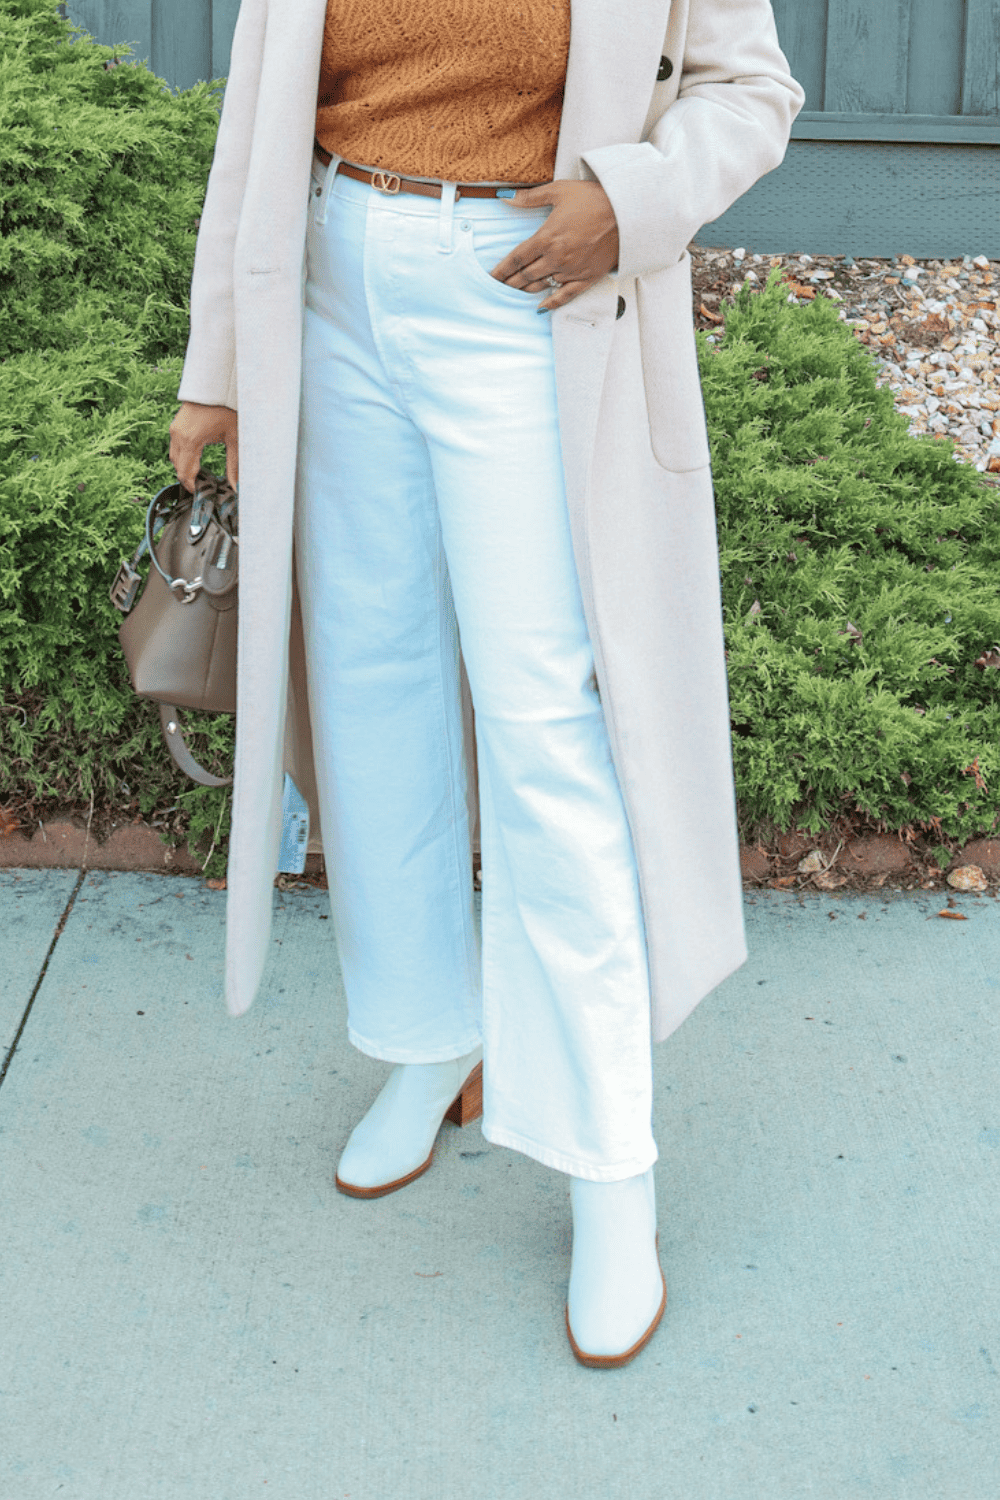 Best Fit Straight leg Jeans You Can Wear With Boots in Winter - Blog Baner